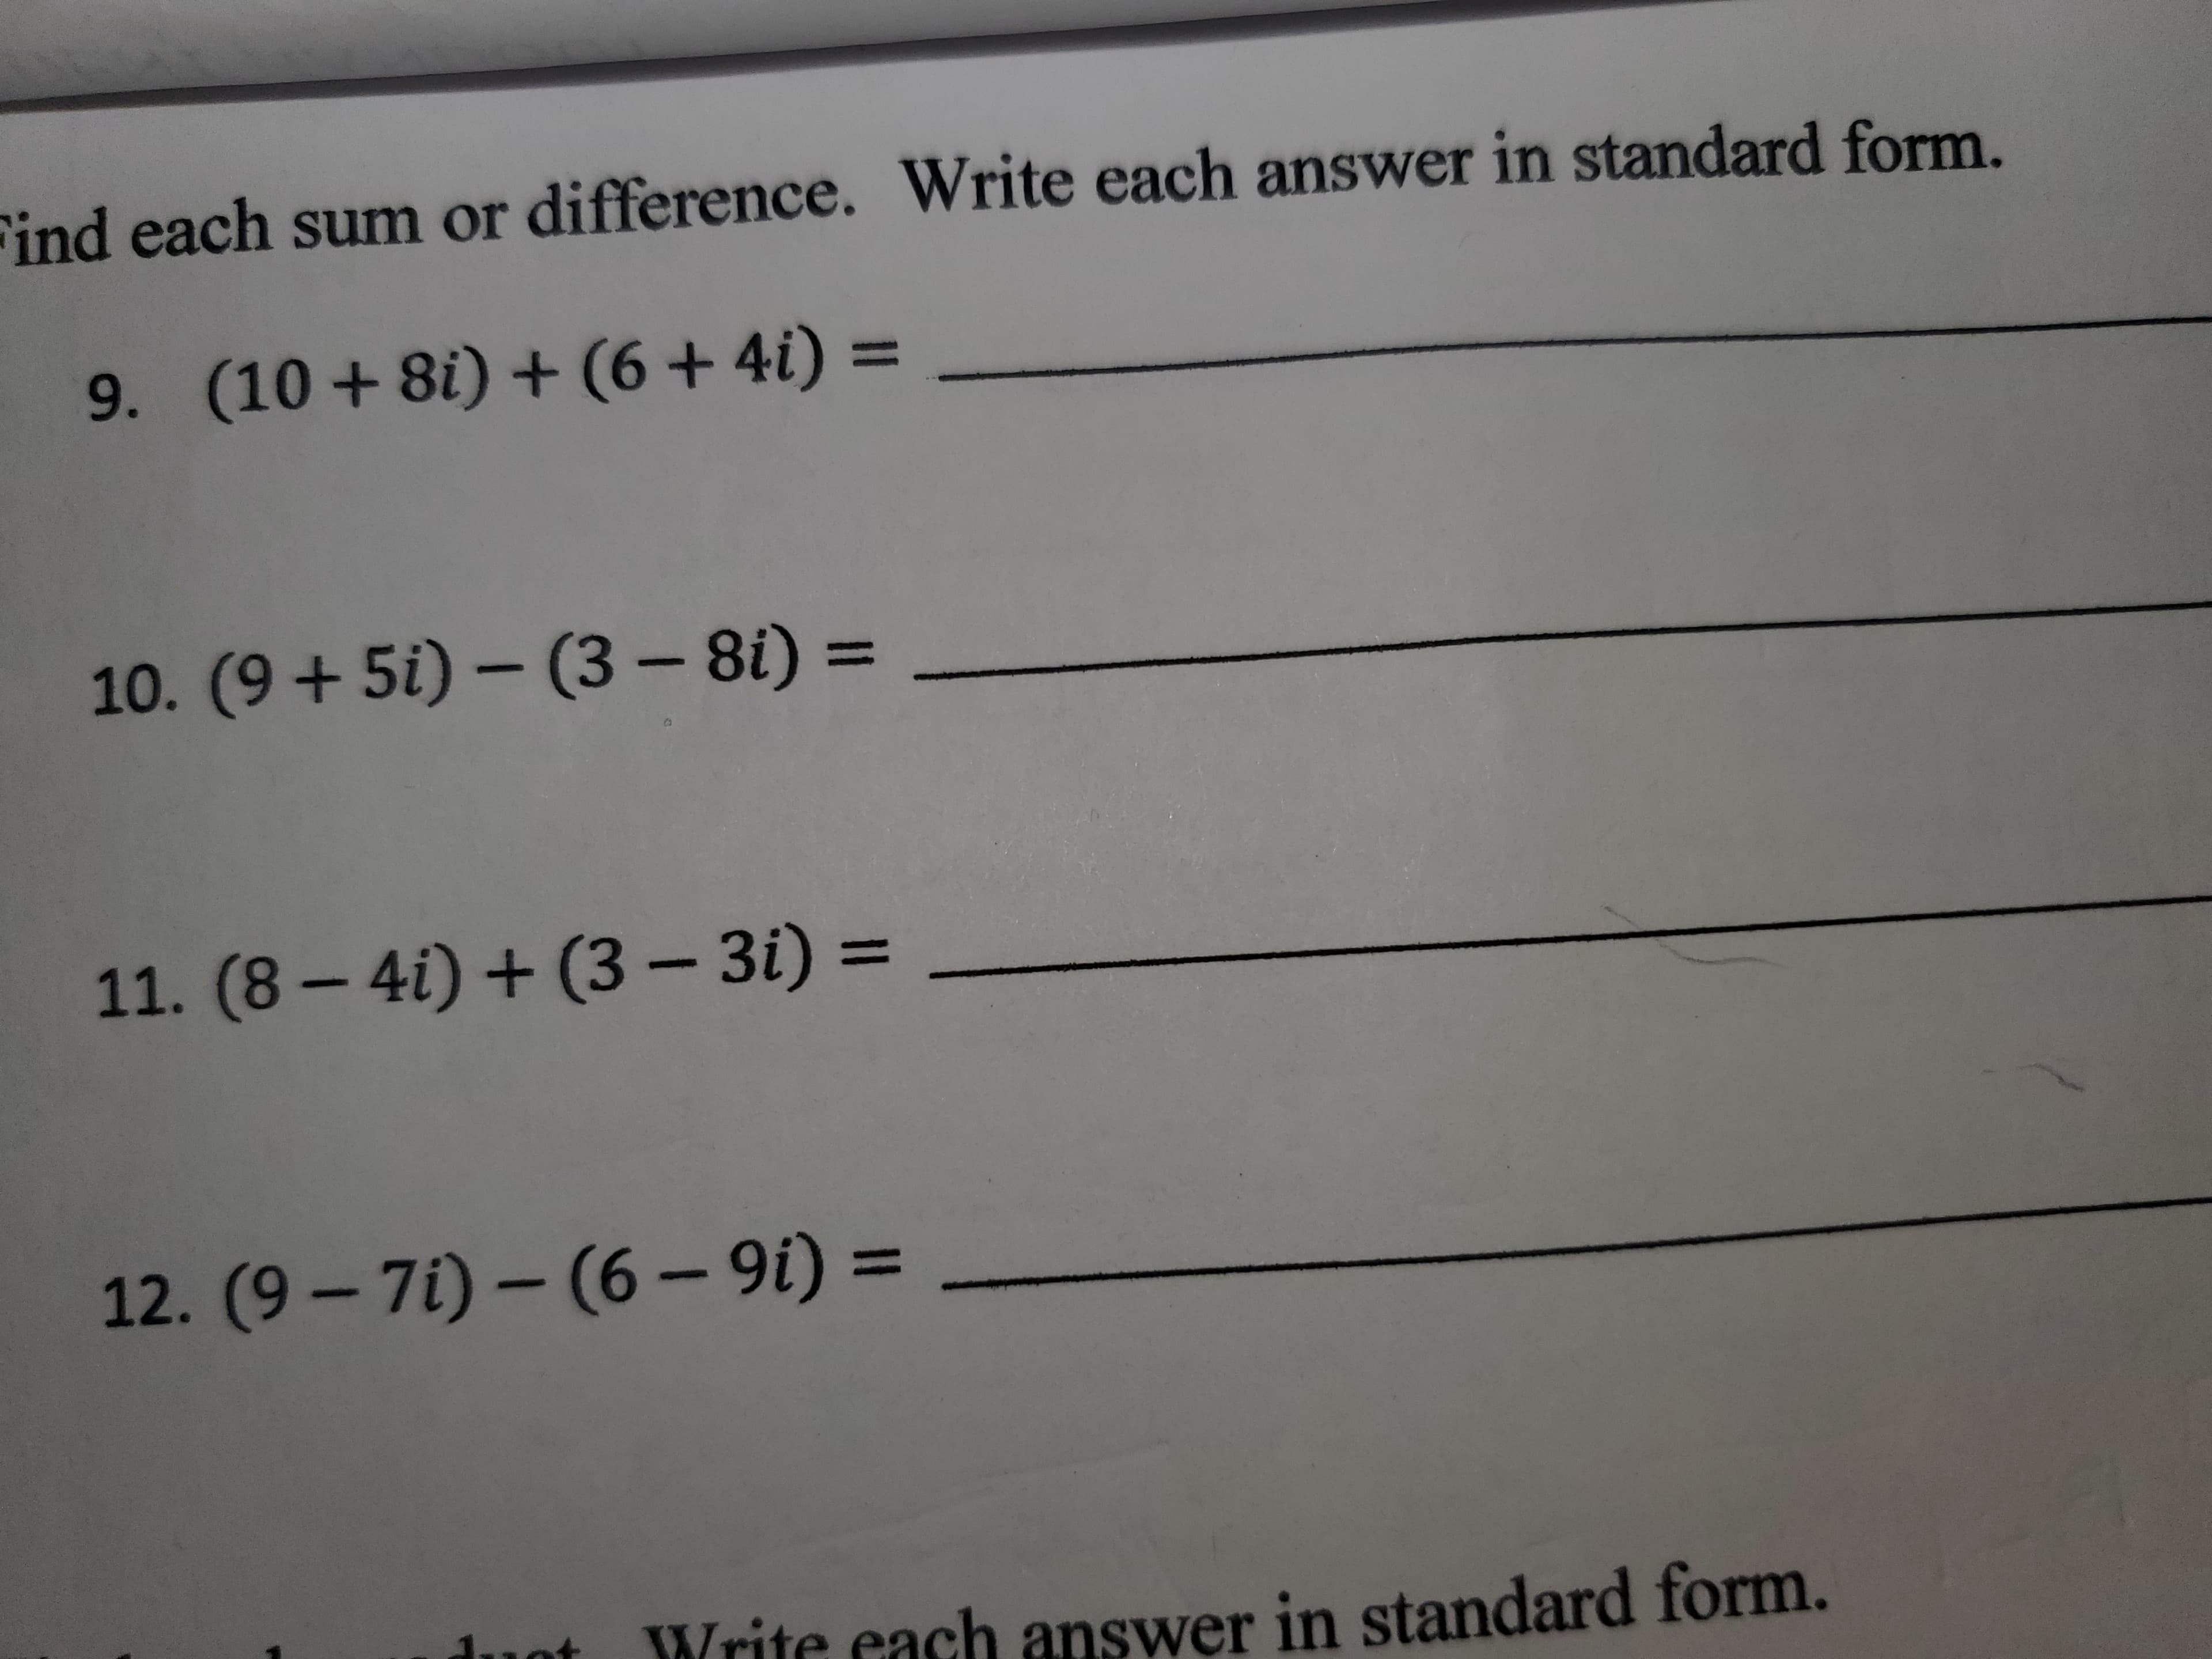 Find each sum or difference. Write each answer in standard form.
9. (10 + 8i) + (6 + 4i) =
%3D
10. (9+ 5i) – (3 – 8i) =
11. (8 – 4i) + (3 – 3i) =
12. (9 – 7i) – (6 – 9i) =
%3D
Write each answer in standard form.
